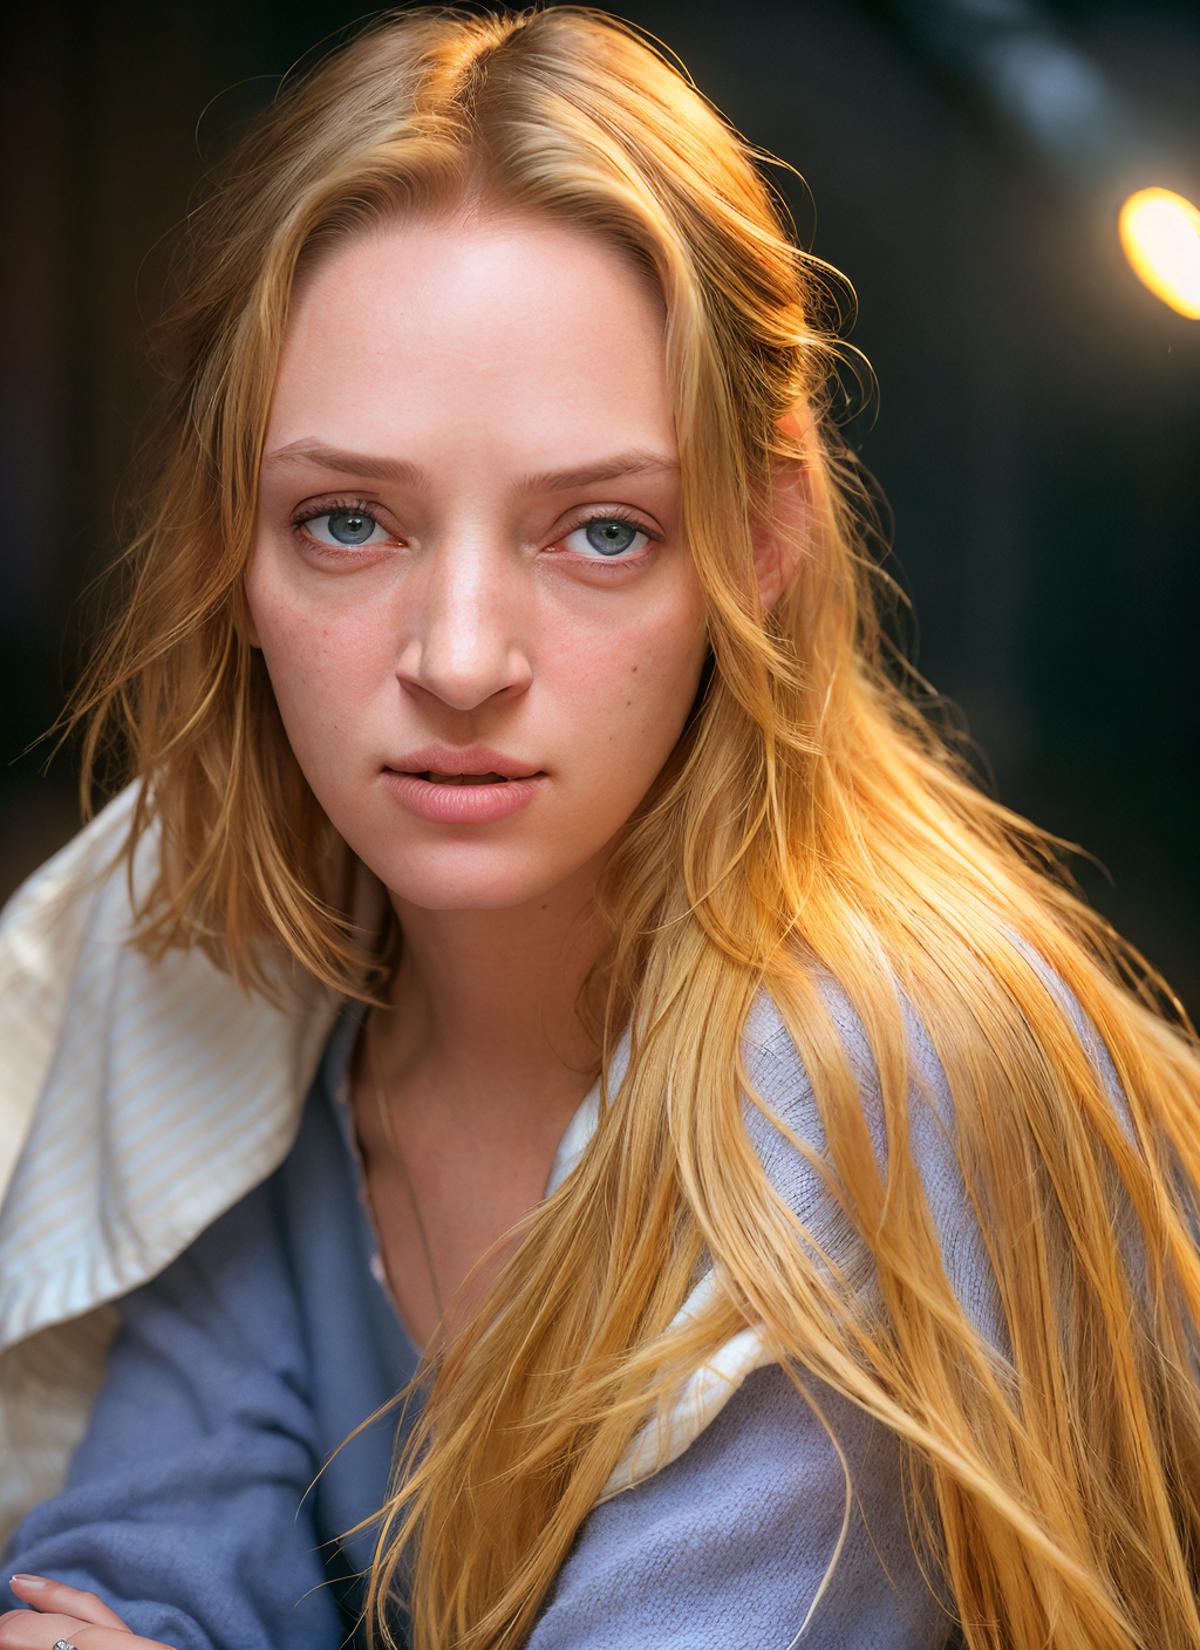 Uma Thurman (young years) image by astragartist